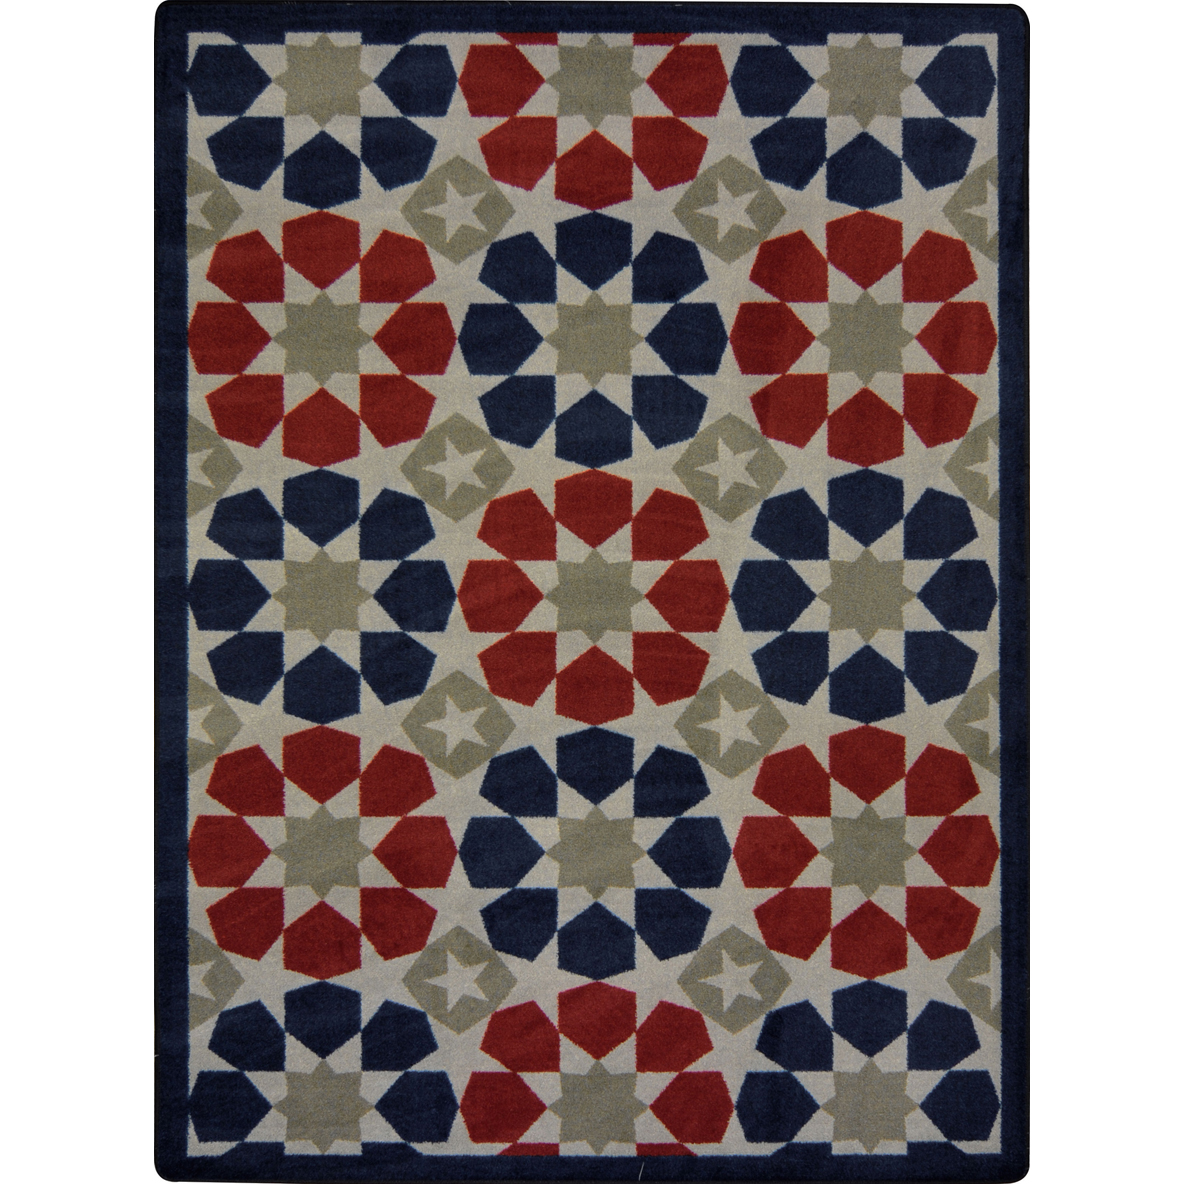 Black Joy Carpets Kaleidoscope Rooftop Whimsical Area Rugs 92-Inch by 129-Inch by 0.36-Inch 